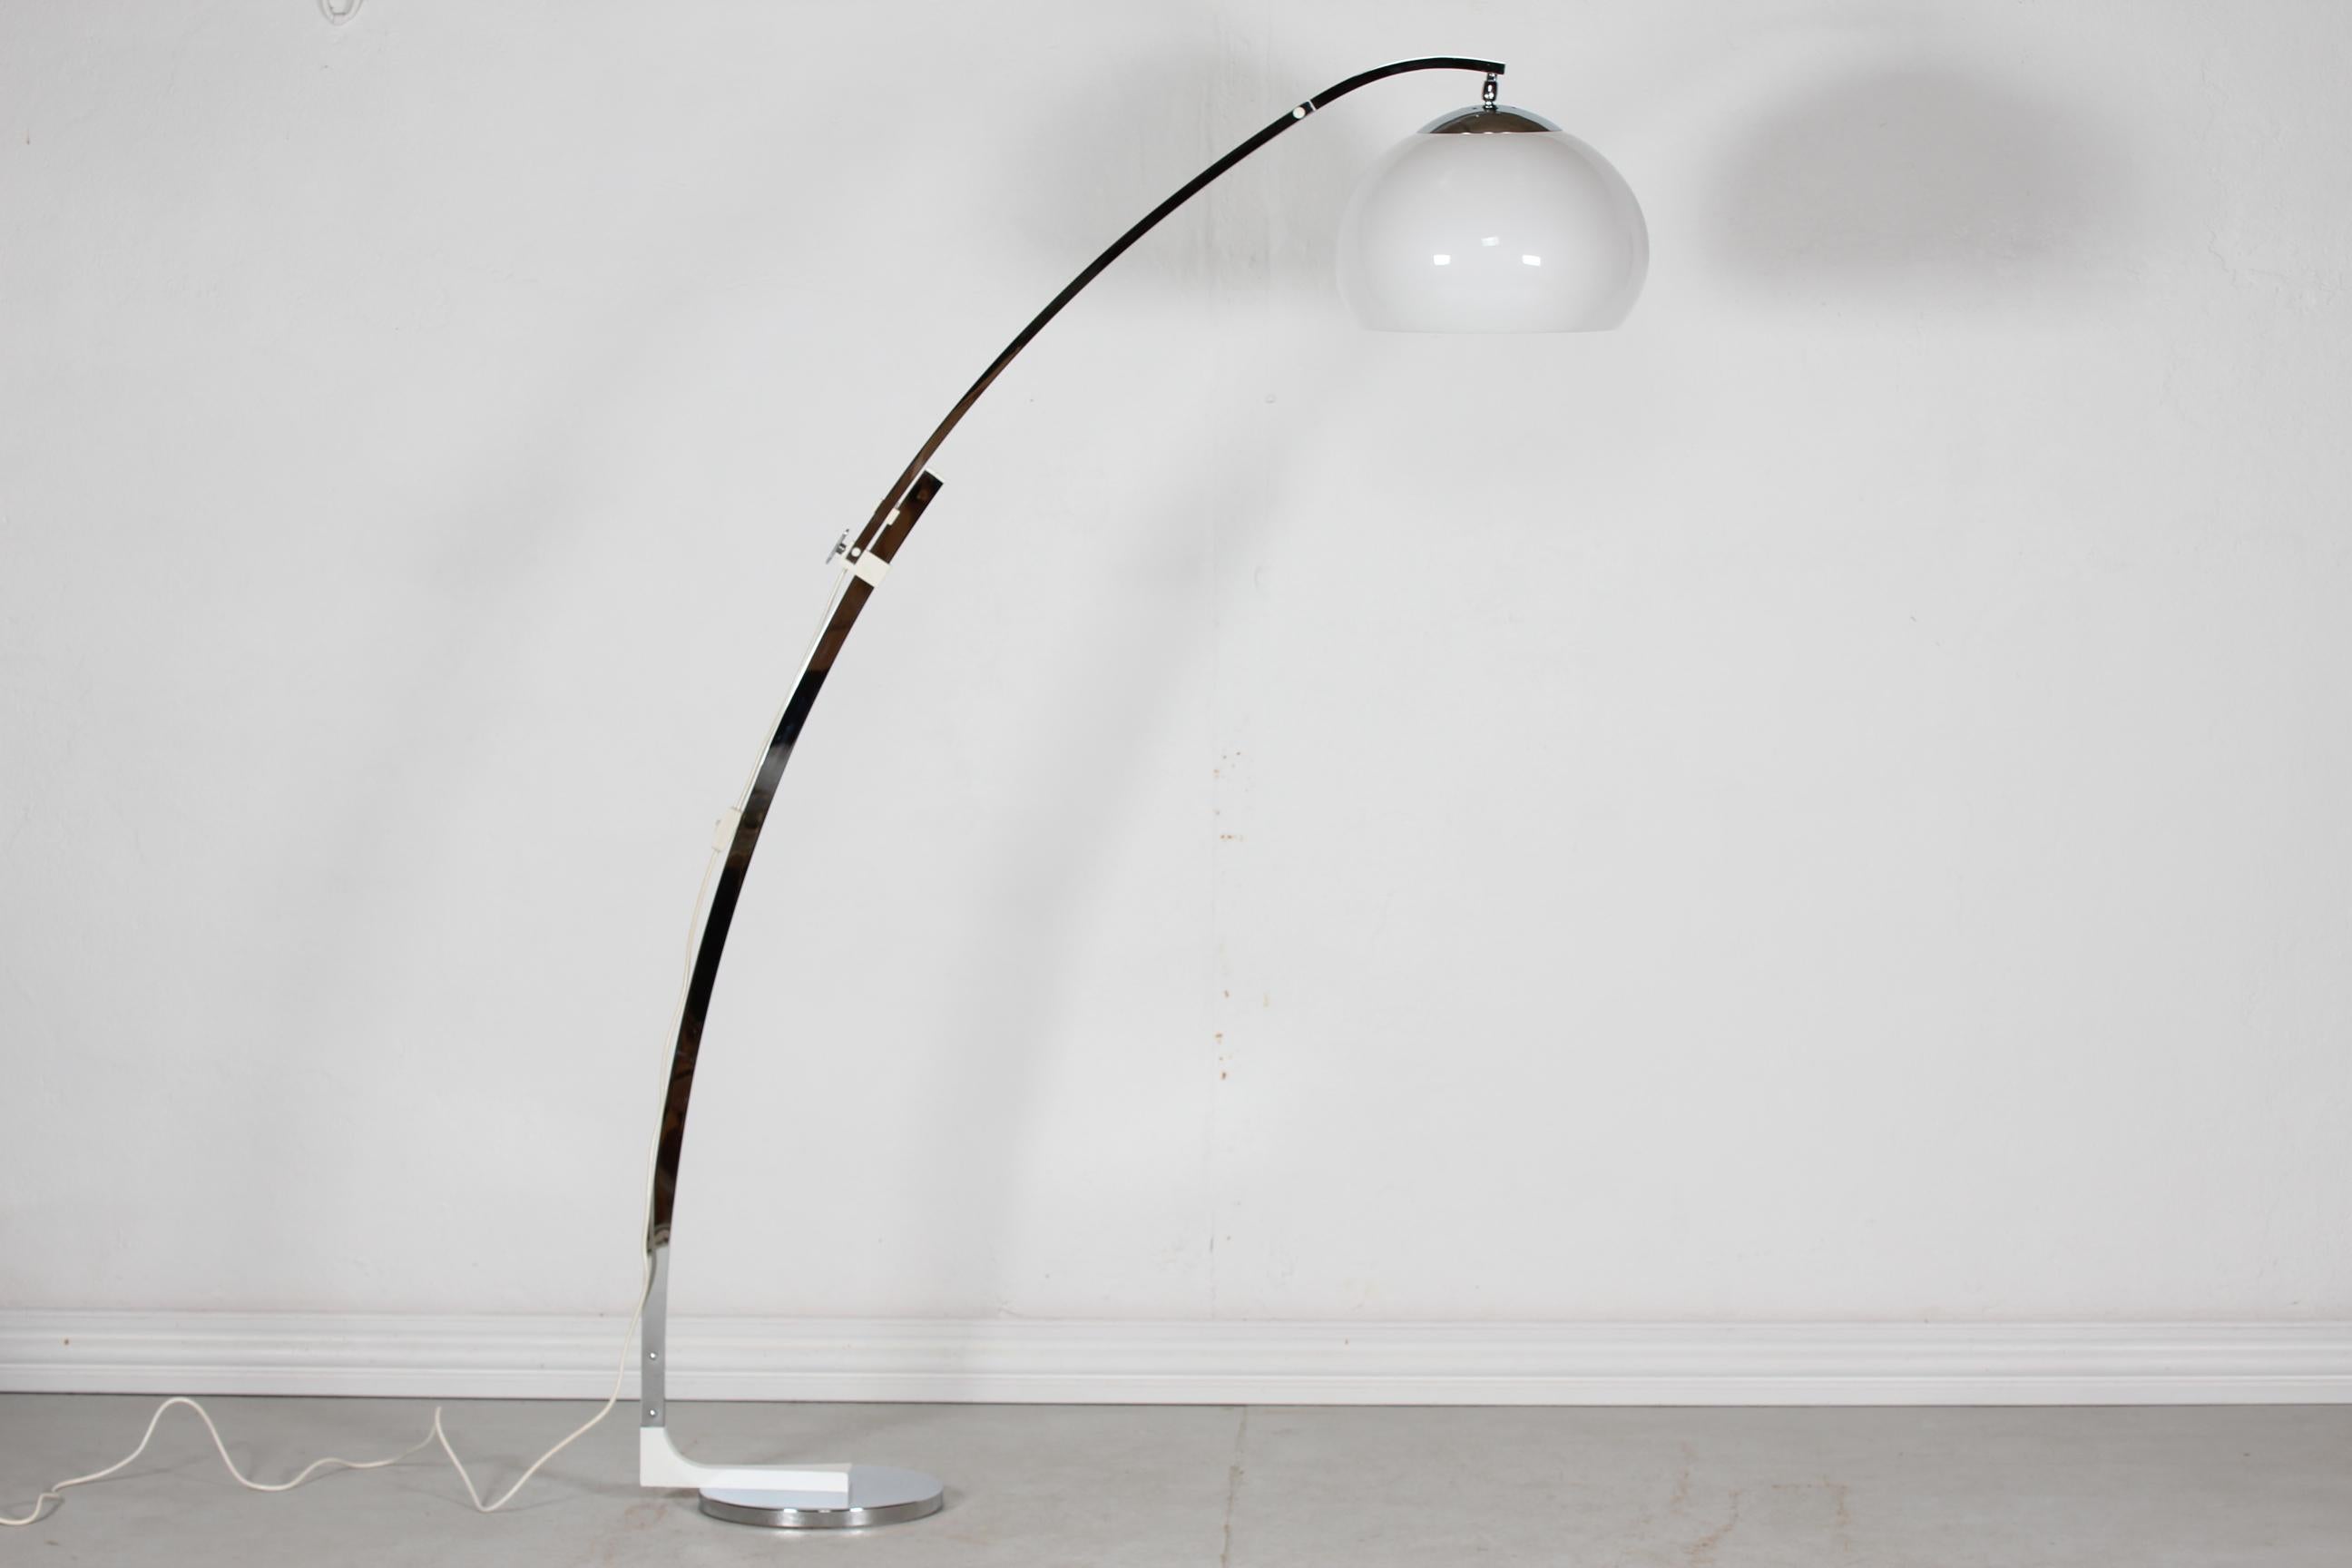 Tall Italian floor lamp by Goffredo Reggiani made for studio Reggiani in Italy in the 1960´s.

The bow shaped floor lamp has a long height adjustable arm made of chromium-plated metal and metal with white lacquer. 
The shade is made of white